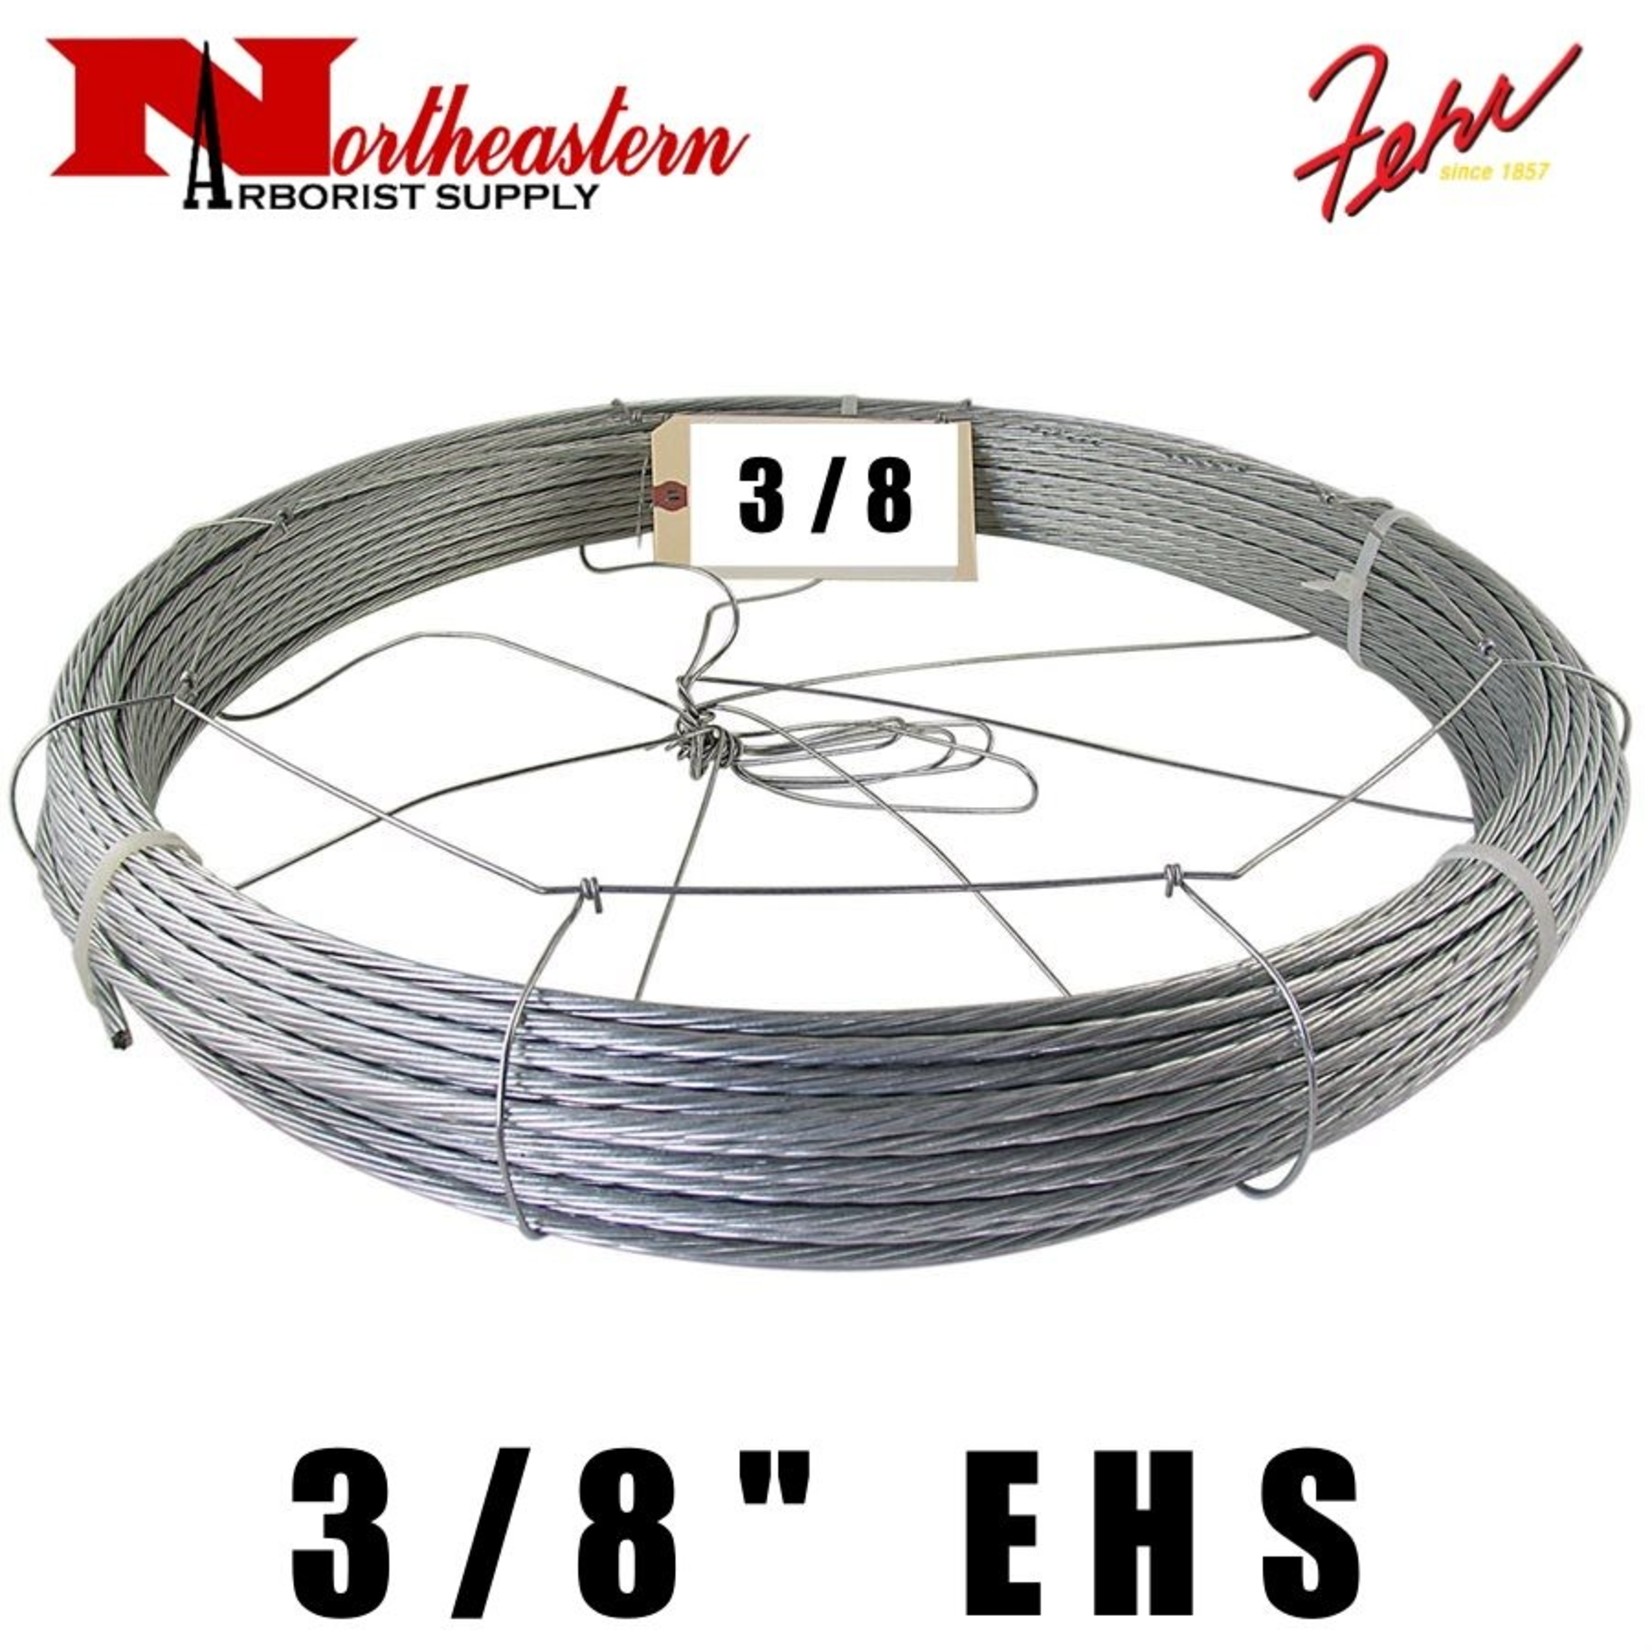 Fehr Bros. Cable EHS Grade 3/8" x 150' with Dispenser Cage